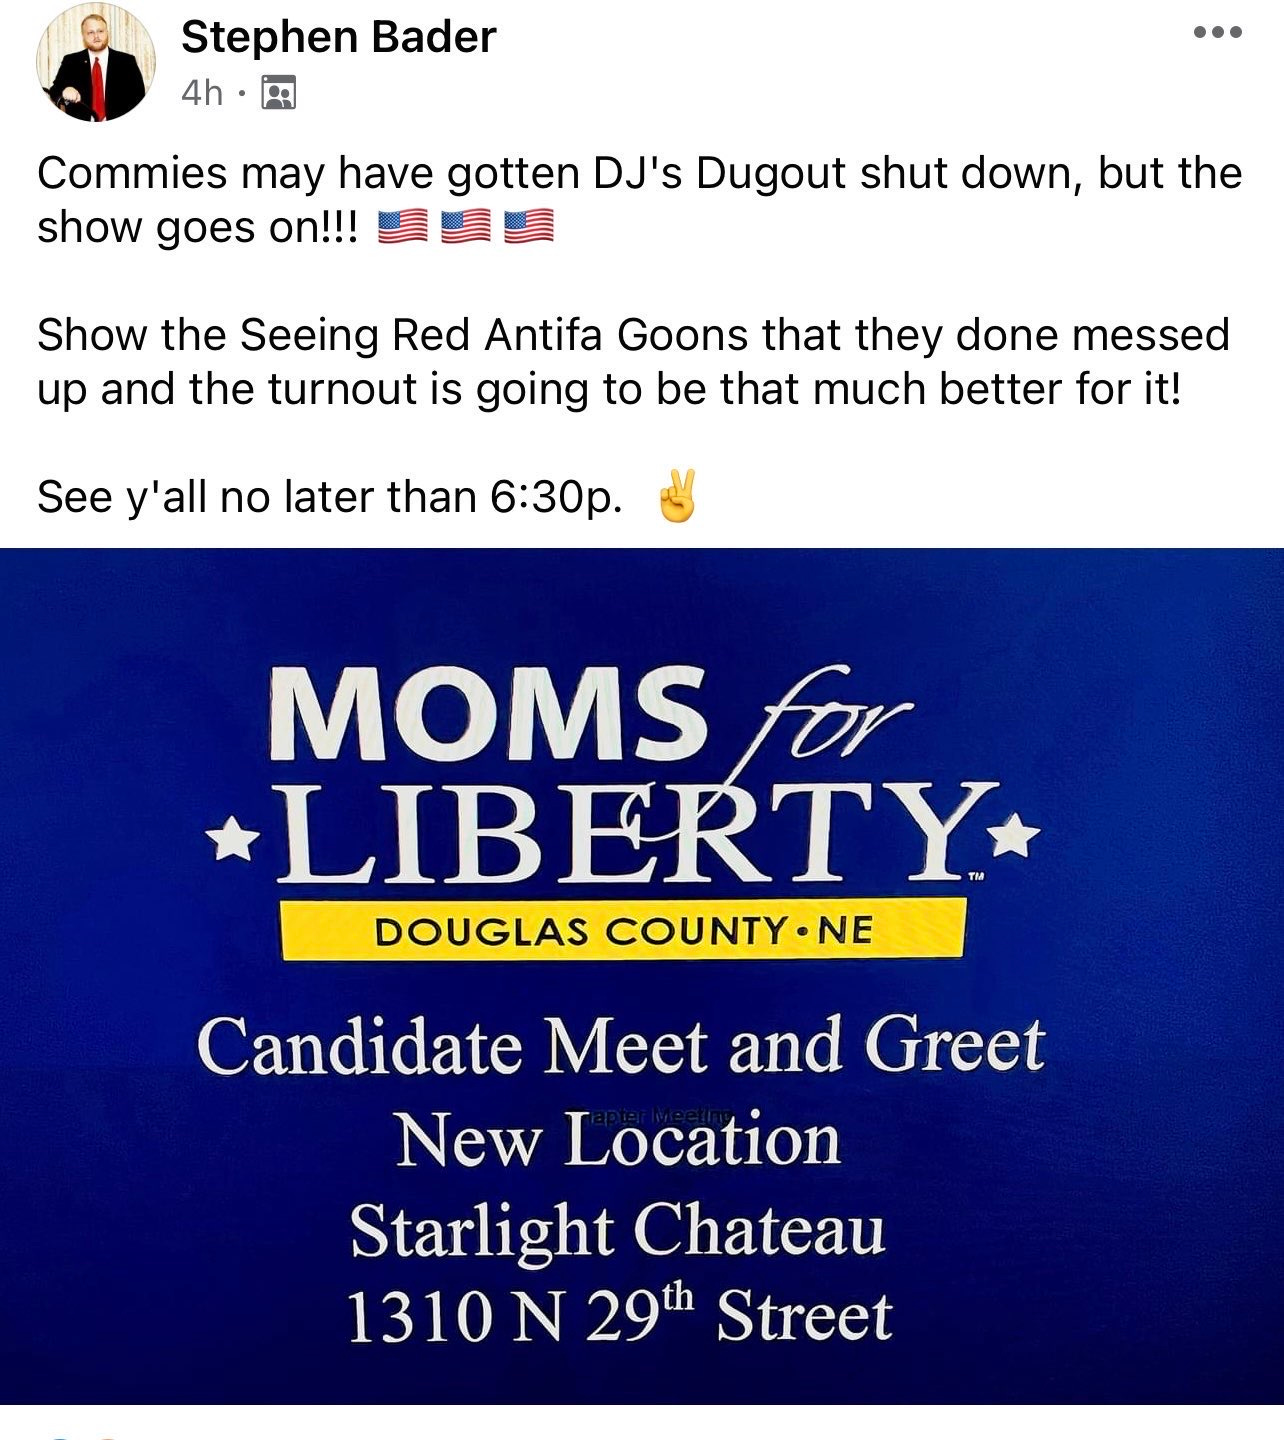 Facebook post by Stephen Bader: "Commies may have gotten DJ's Dugout shut down, but the show goes on!!! Show the Seeing Red Antifa Goons that they done messed up and the turnout is going to be that much better for it! See y'all no later than 6:30p" Moms for Liberty Candidate Meet and Greet New Location Starlight Chateau 1310 N 29th Street